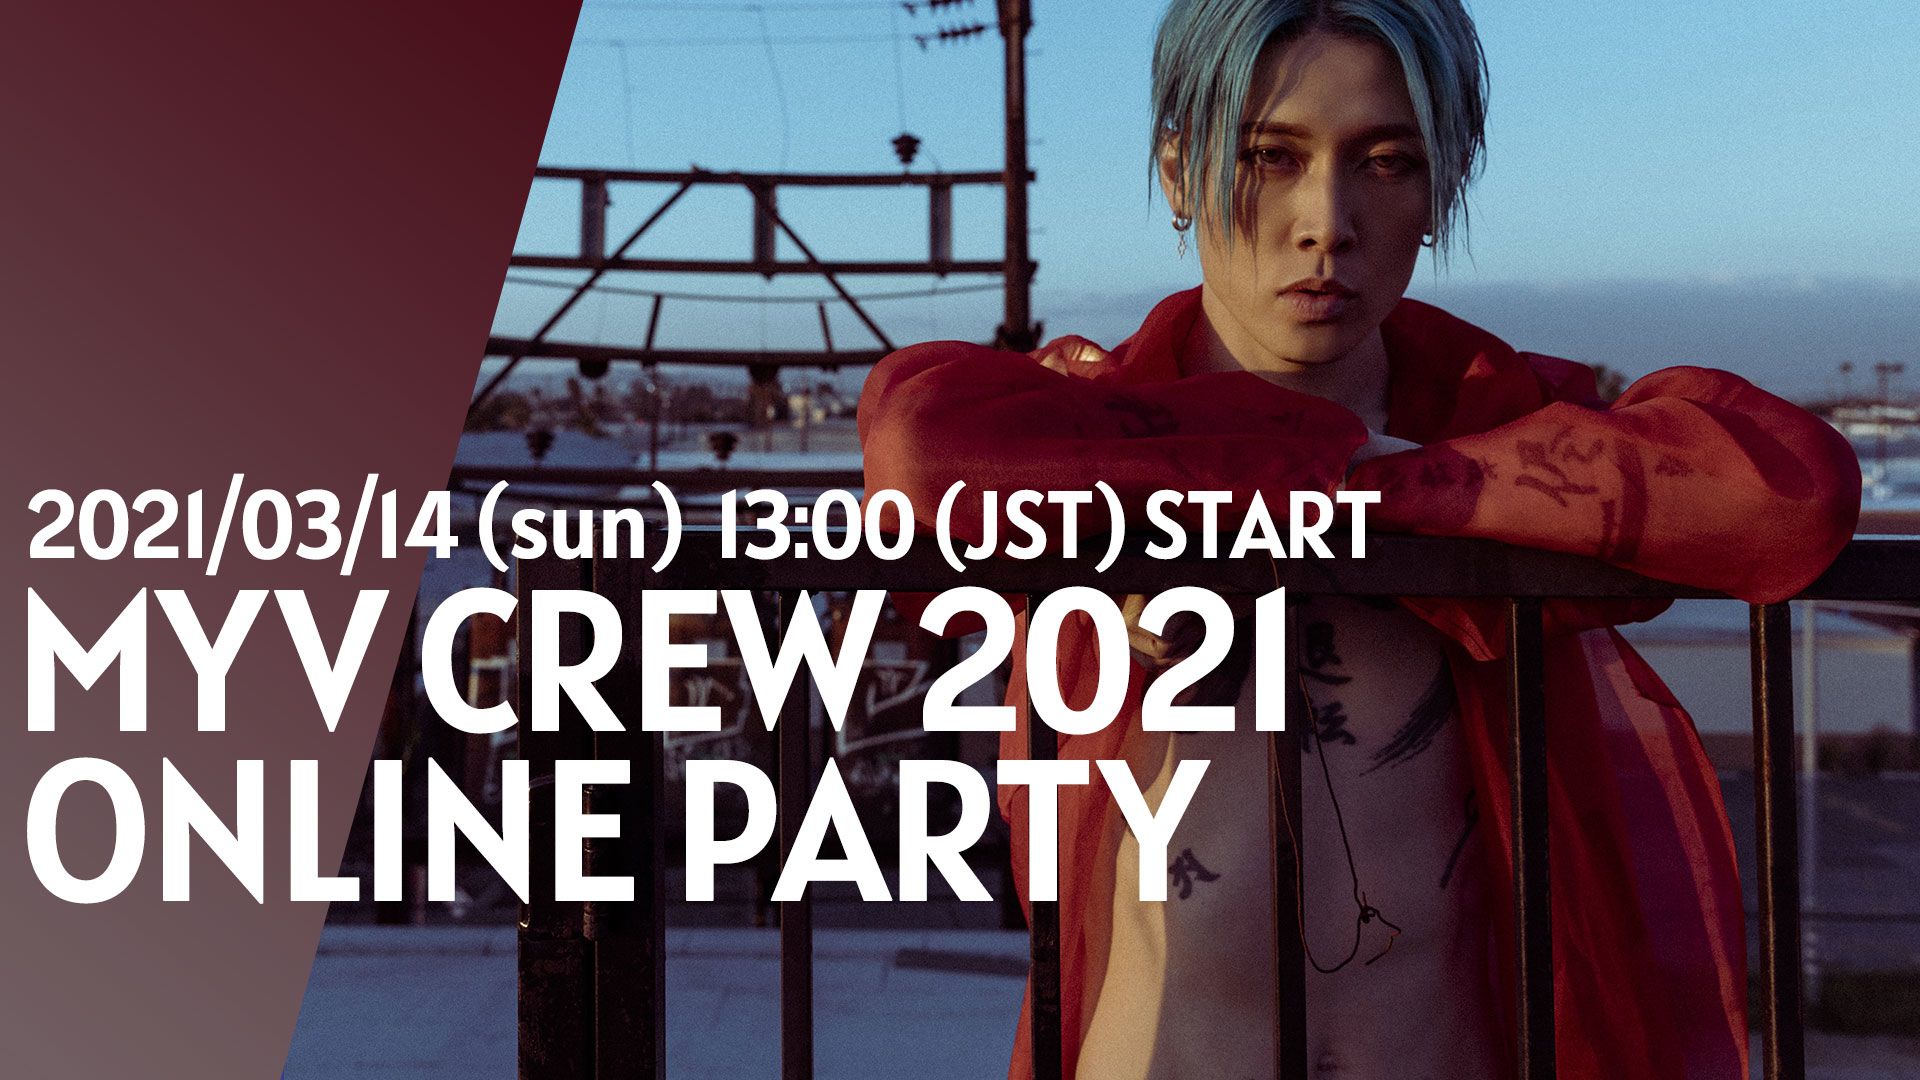 [Streaming+] MYV CREW 2021 ONLINE PARTY